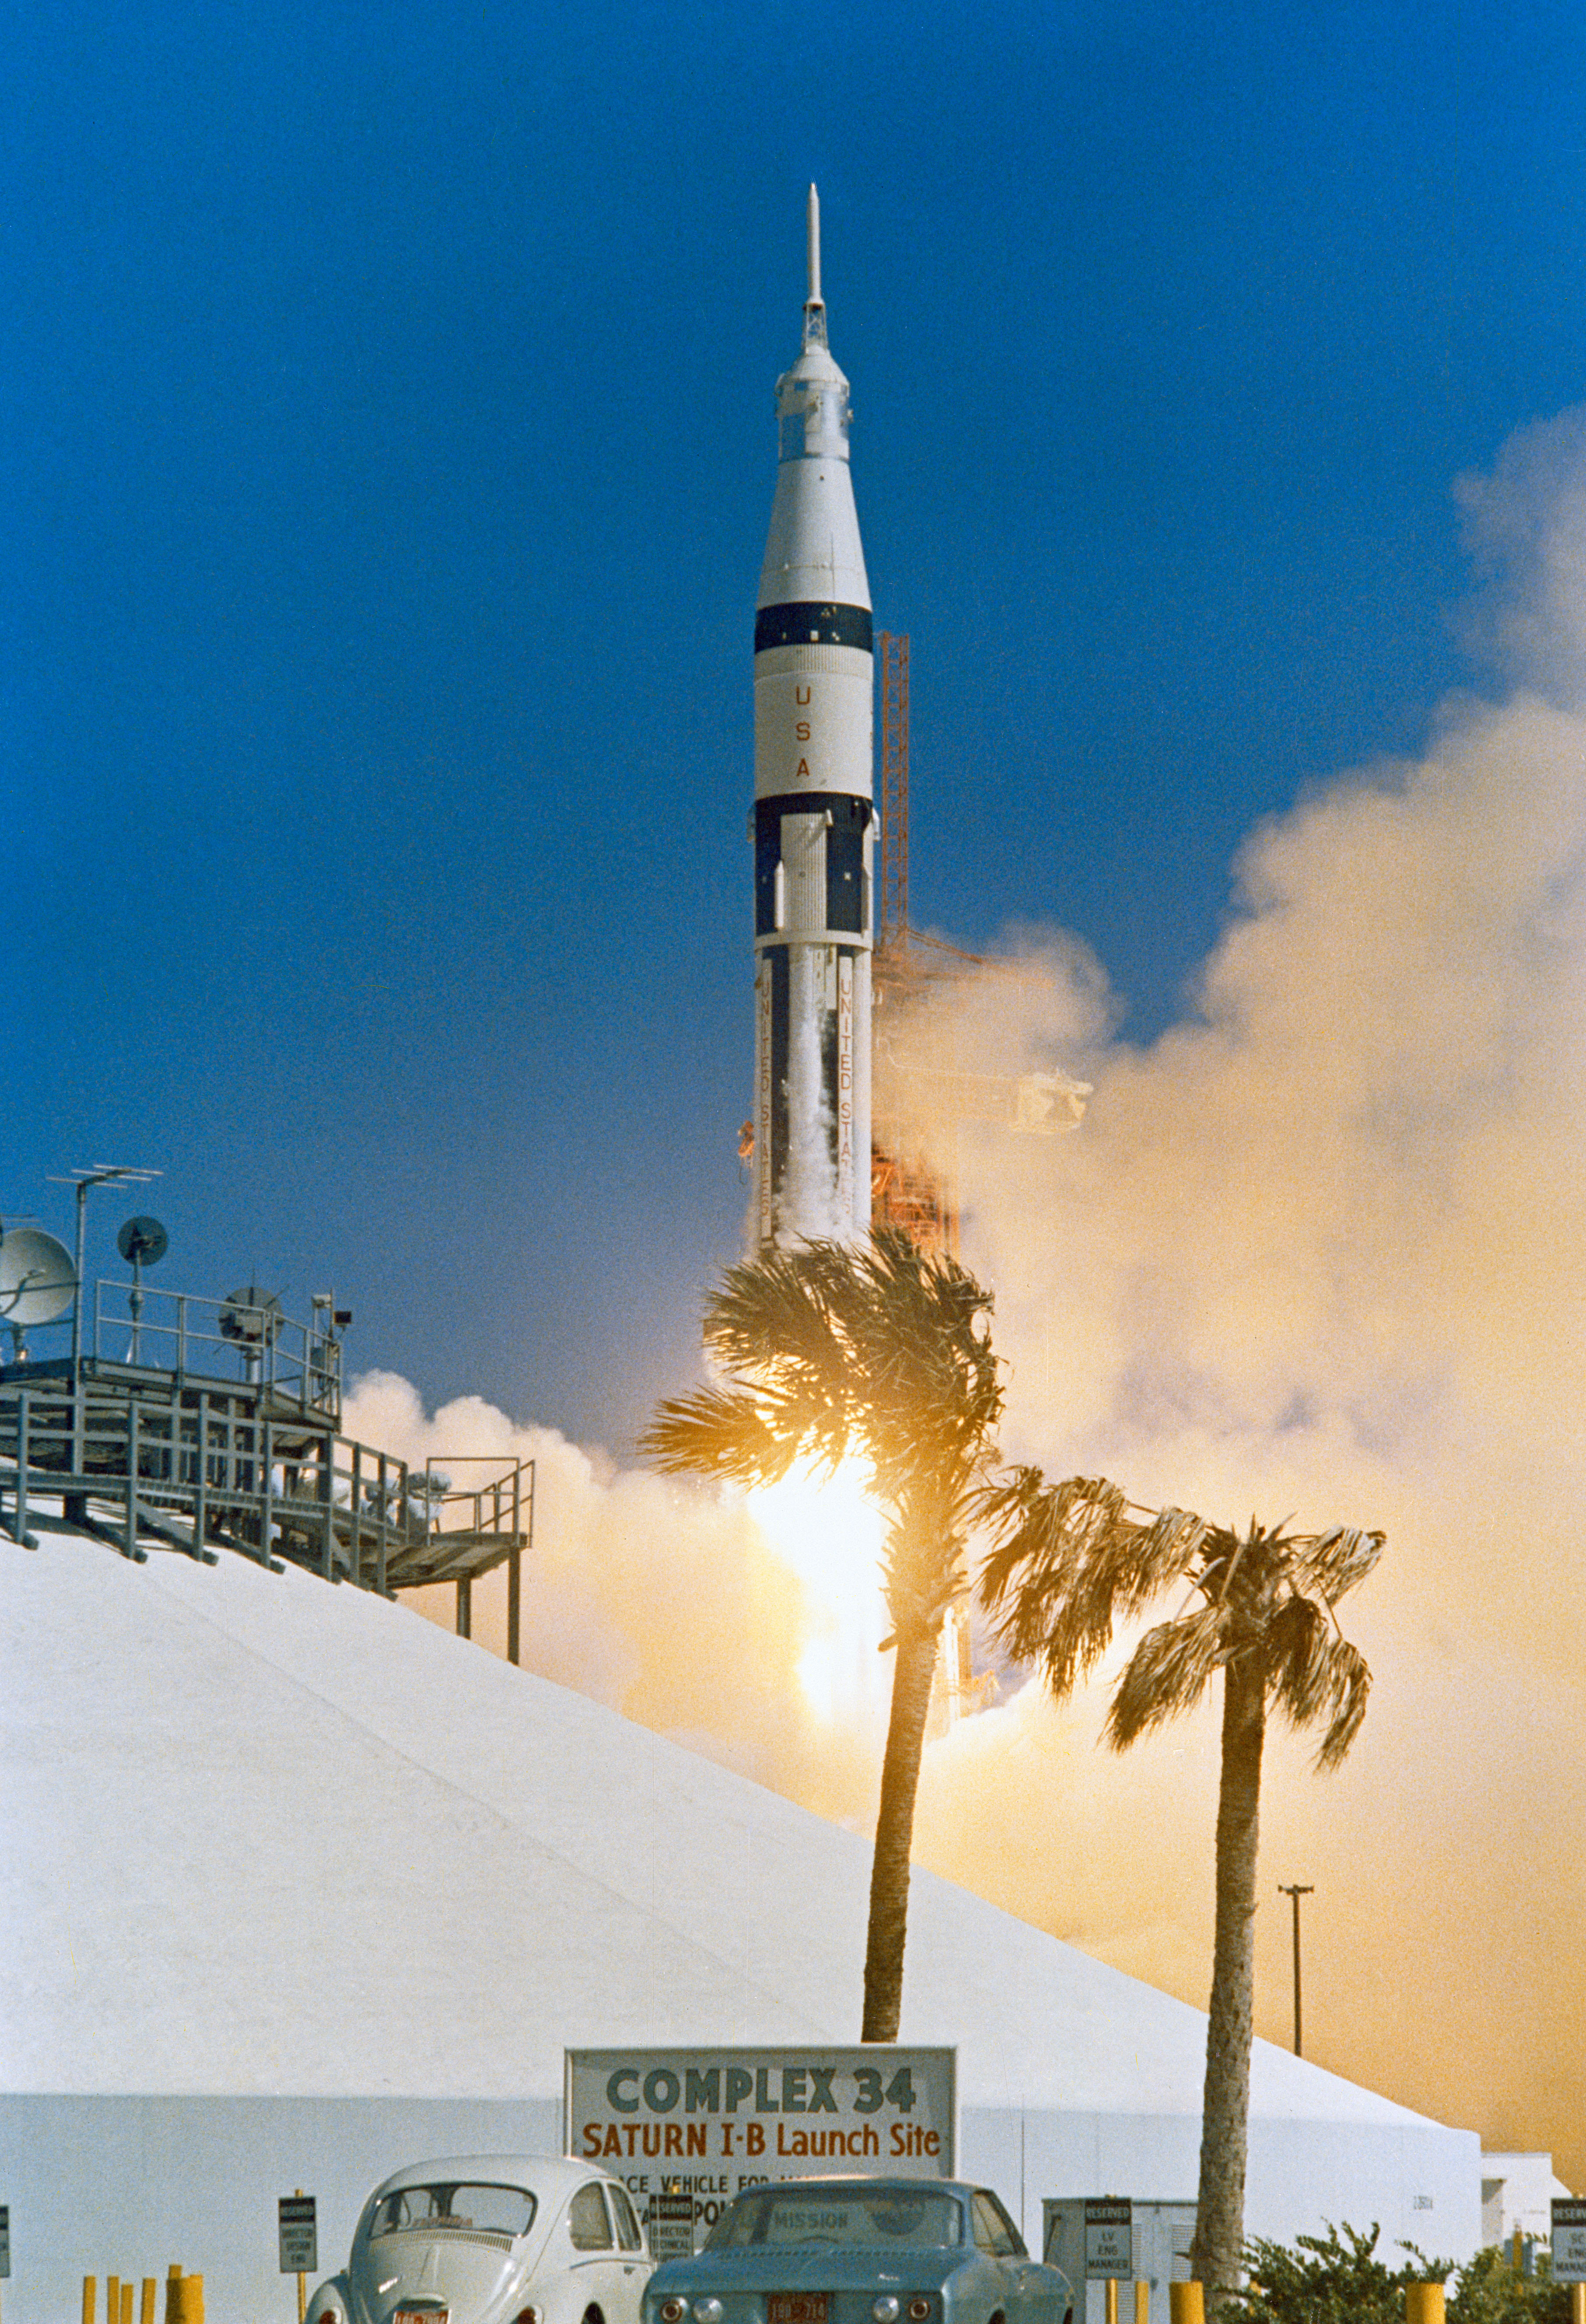 Liftoff of Apollo 7, returning American astronauts to space